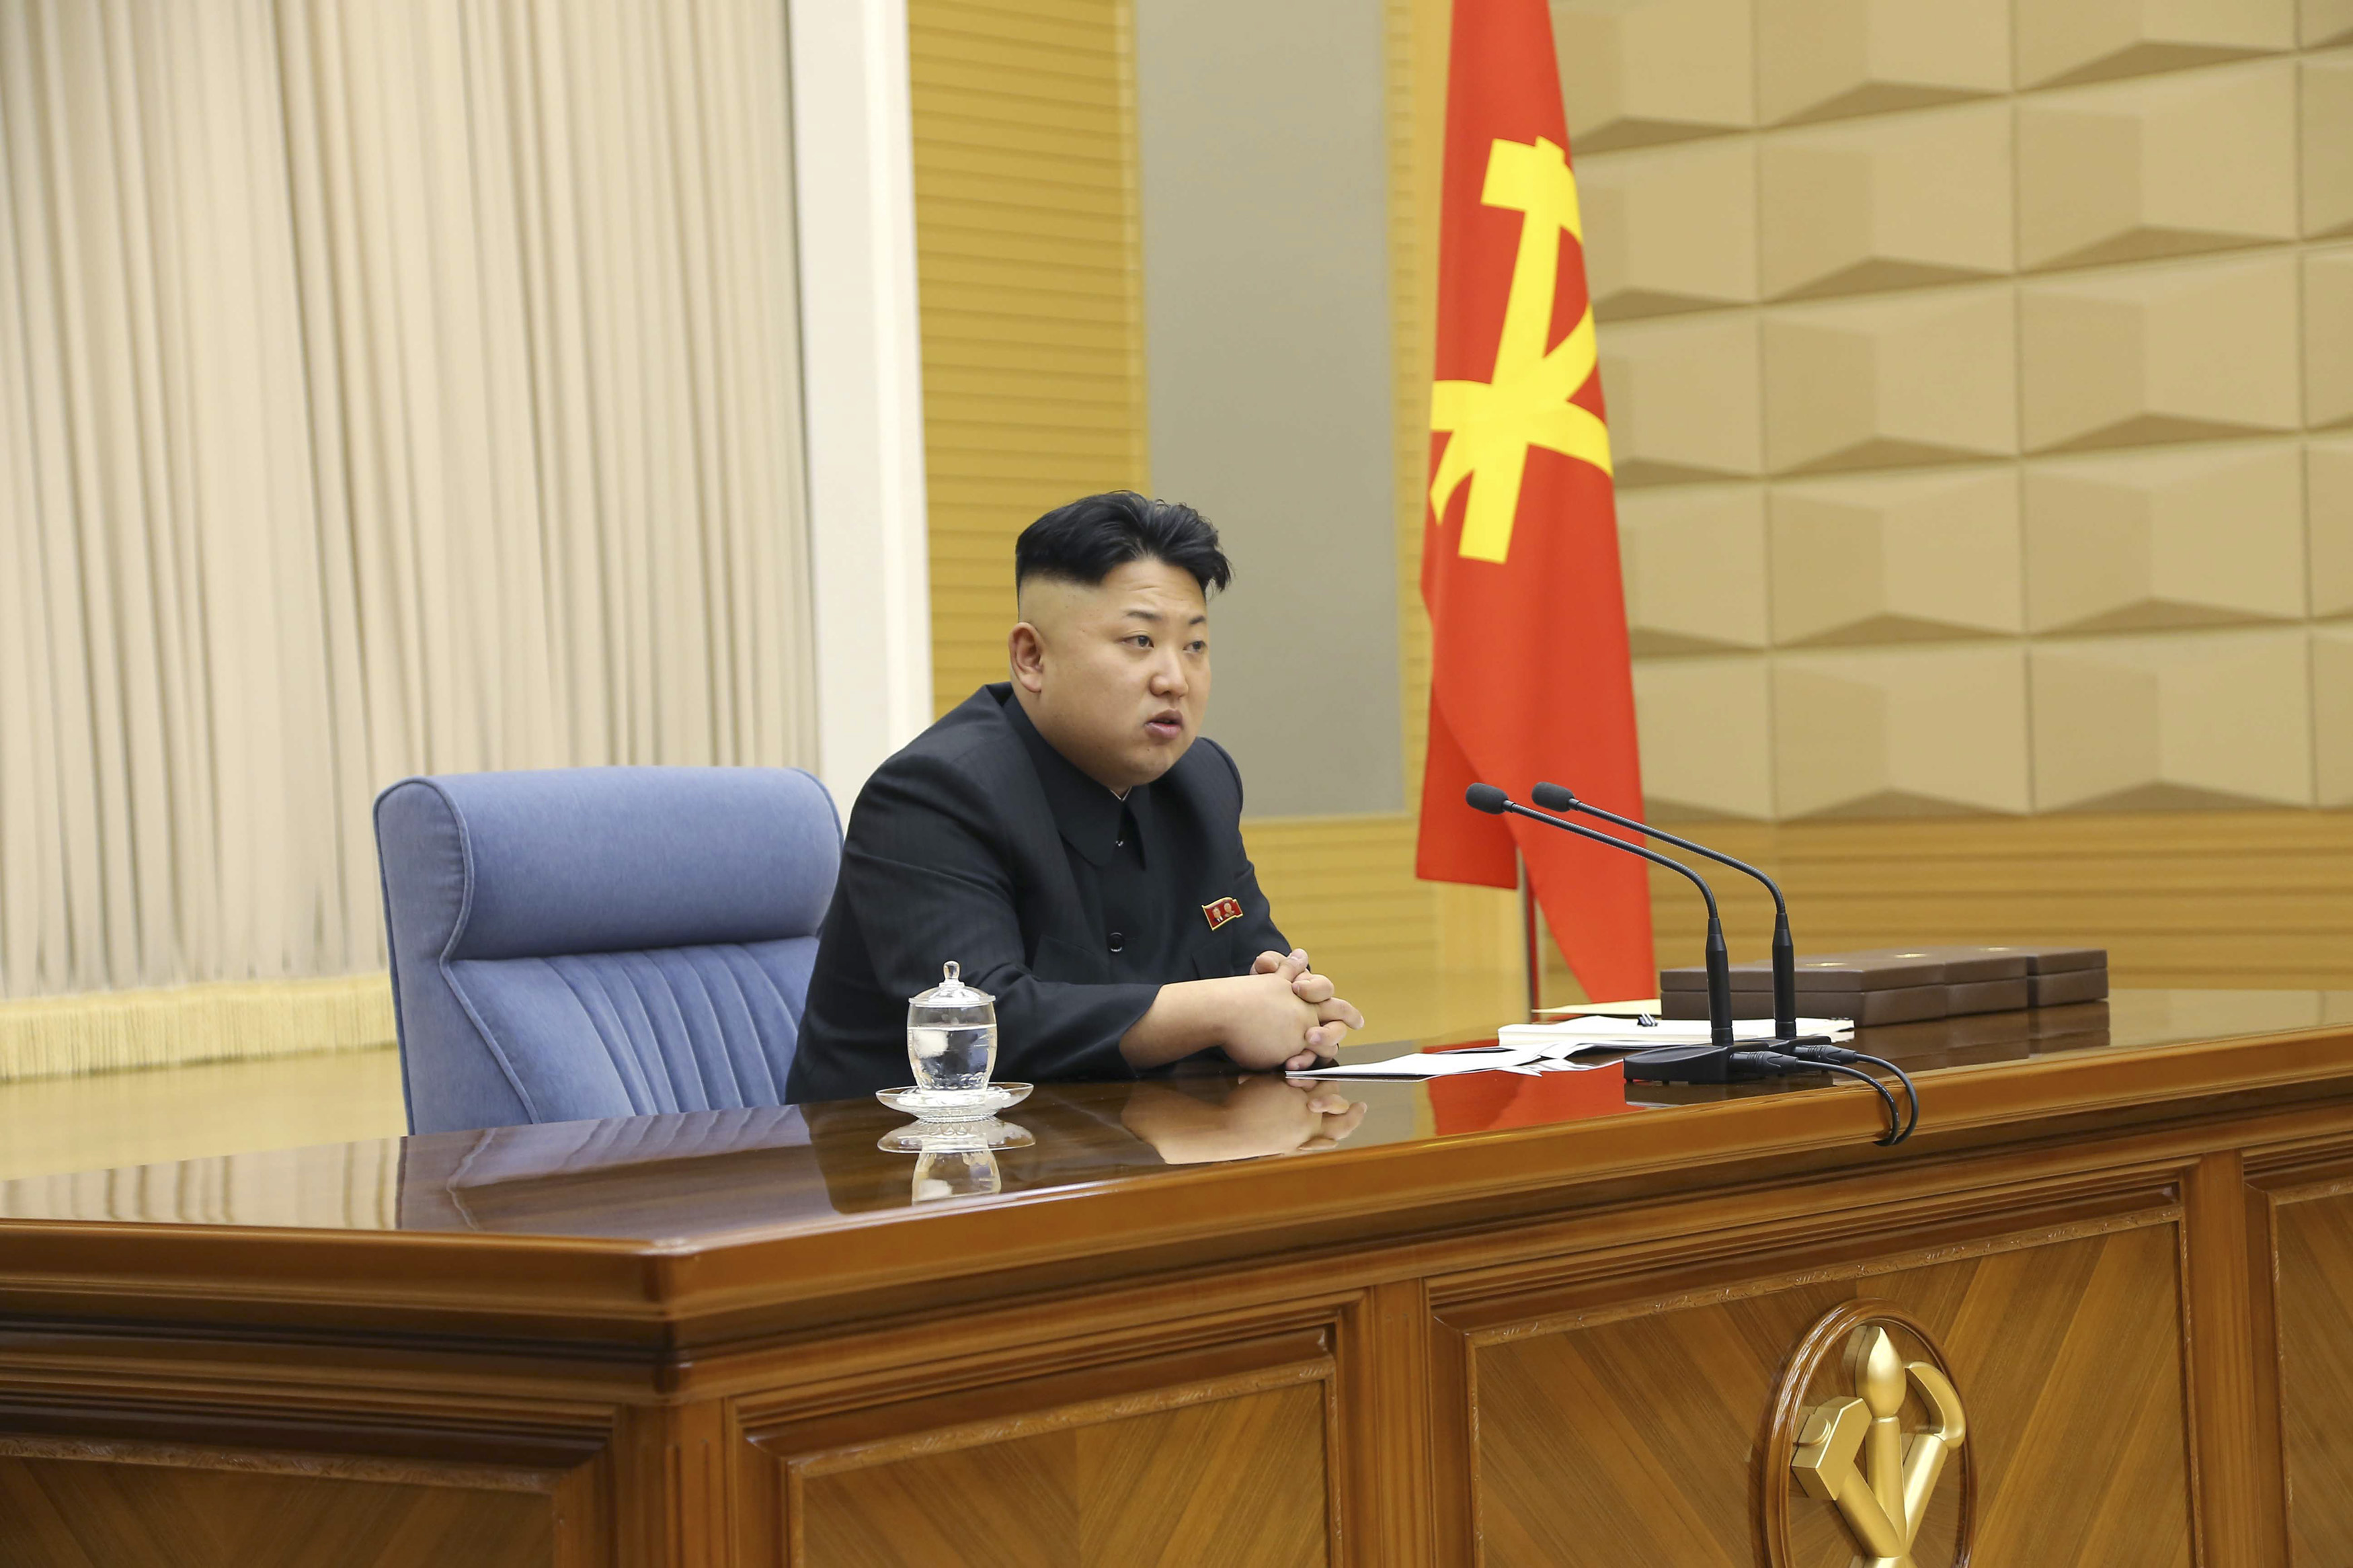 Nice haircut, Mr Dictator. North Korea leader Kim Jong Un presides over a meeting of the Central Military Commission of the Workers' Party of Korea. (KCNA / Reuters)